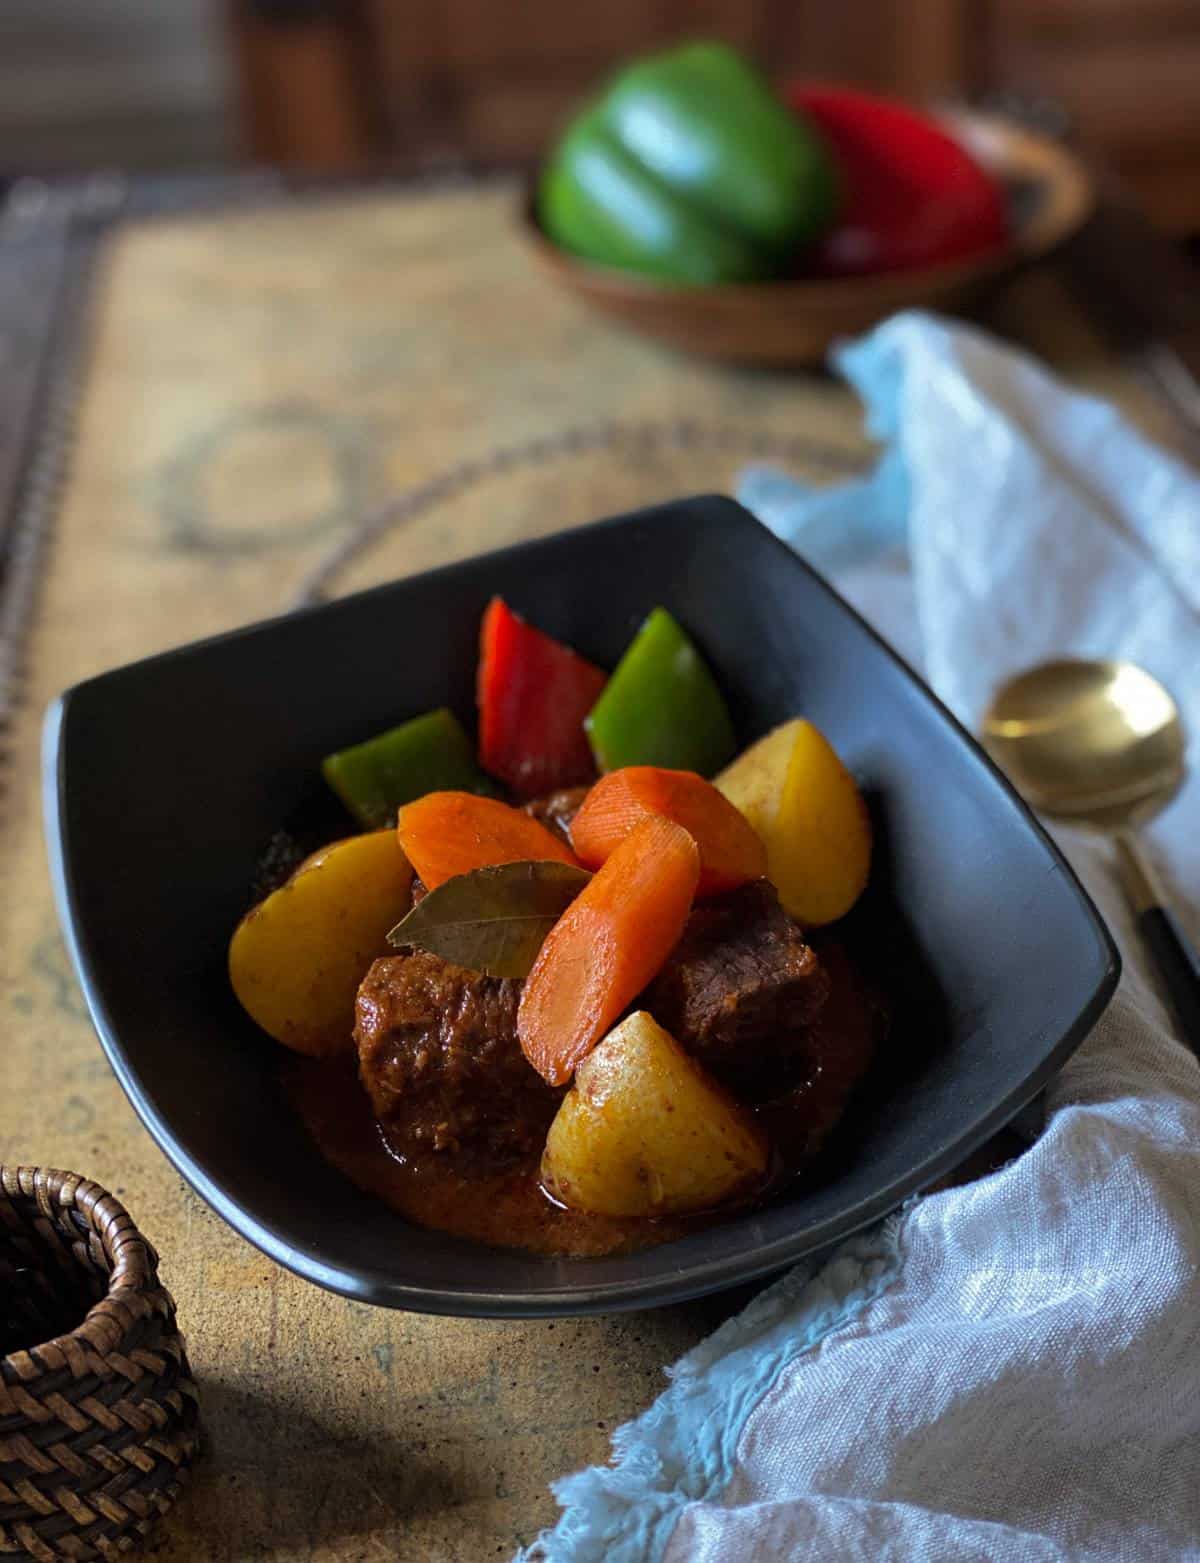 Beef with carrots, potatoes, and red and green bell peppers in a black dish on a table with napkin and spoon on the side.